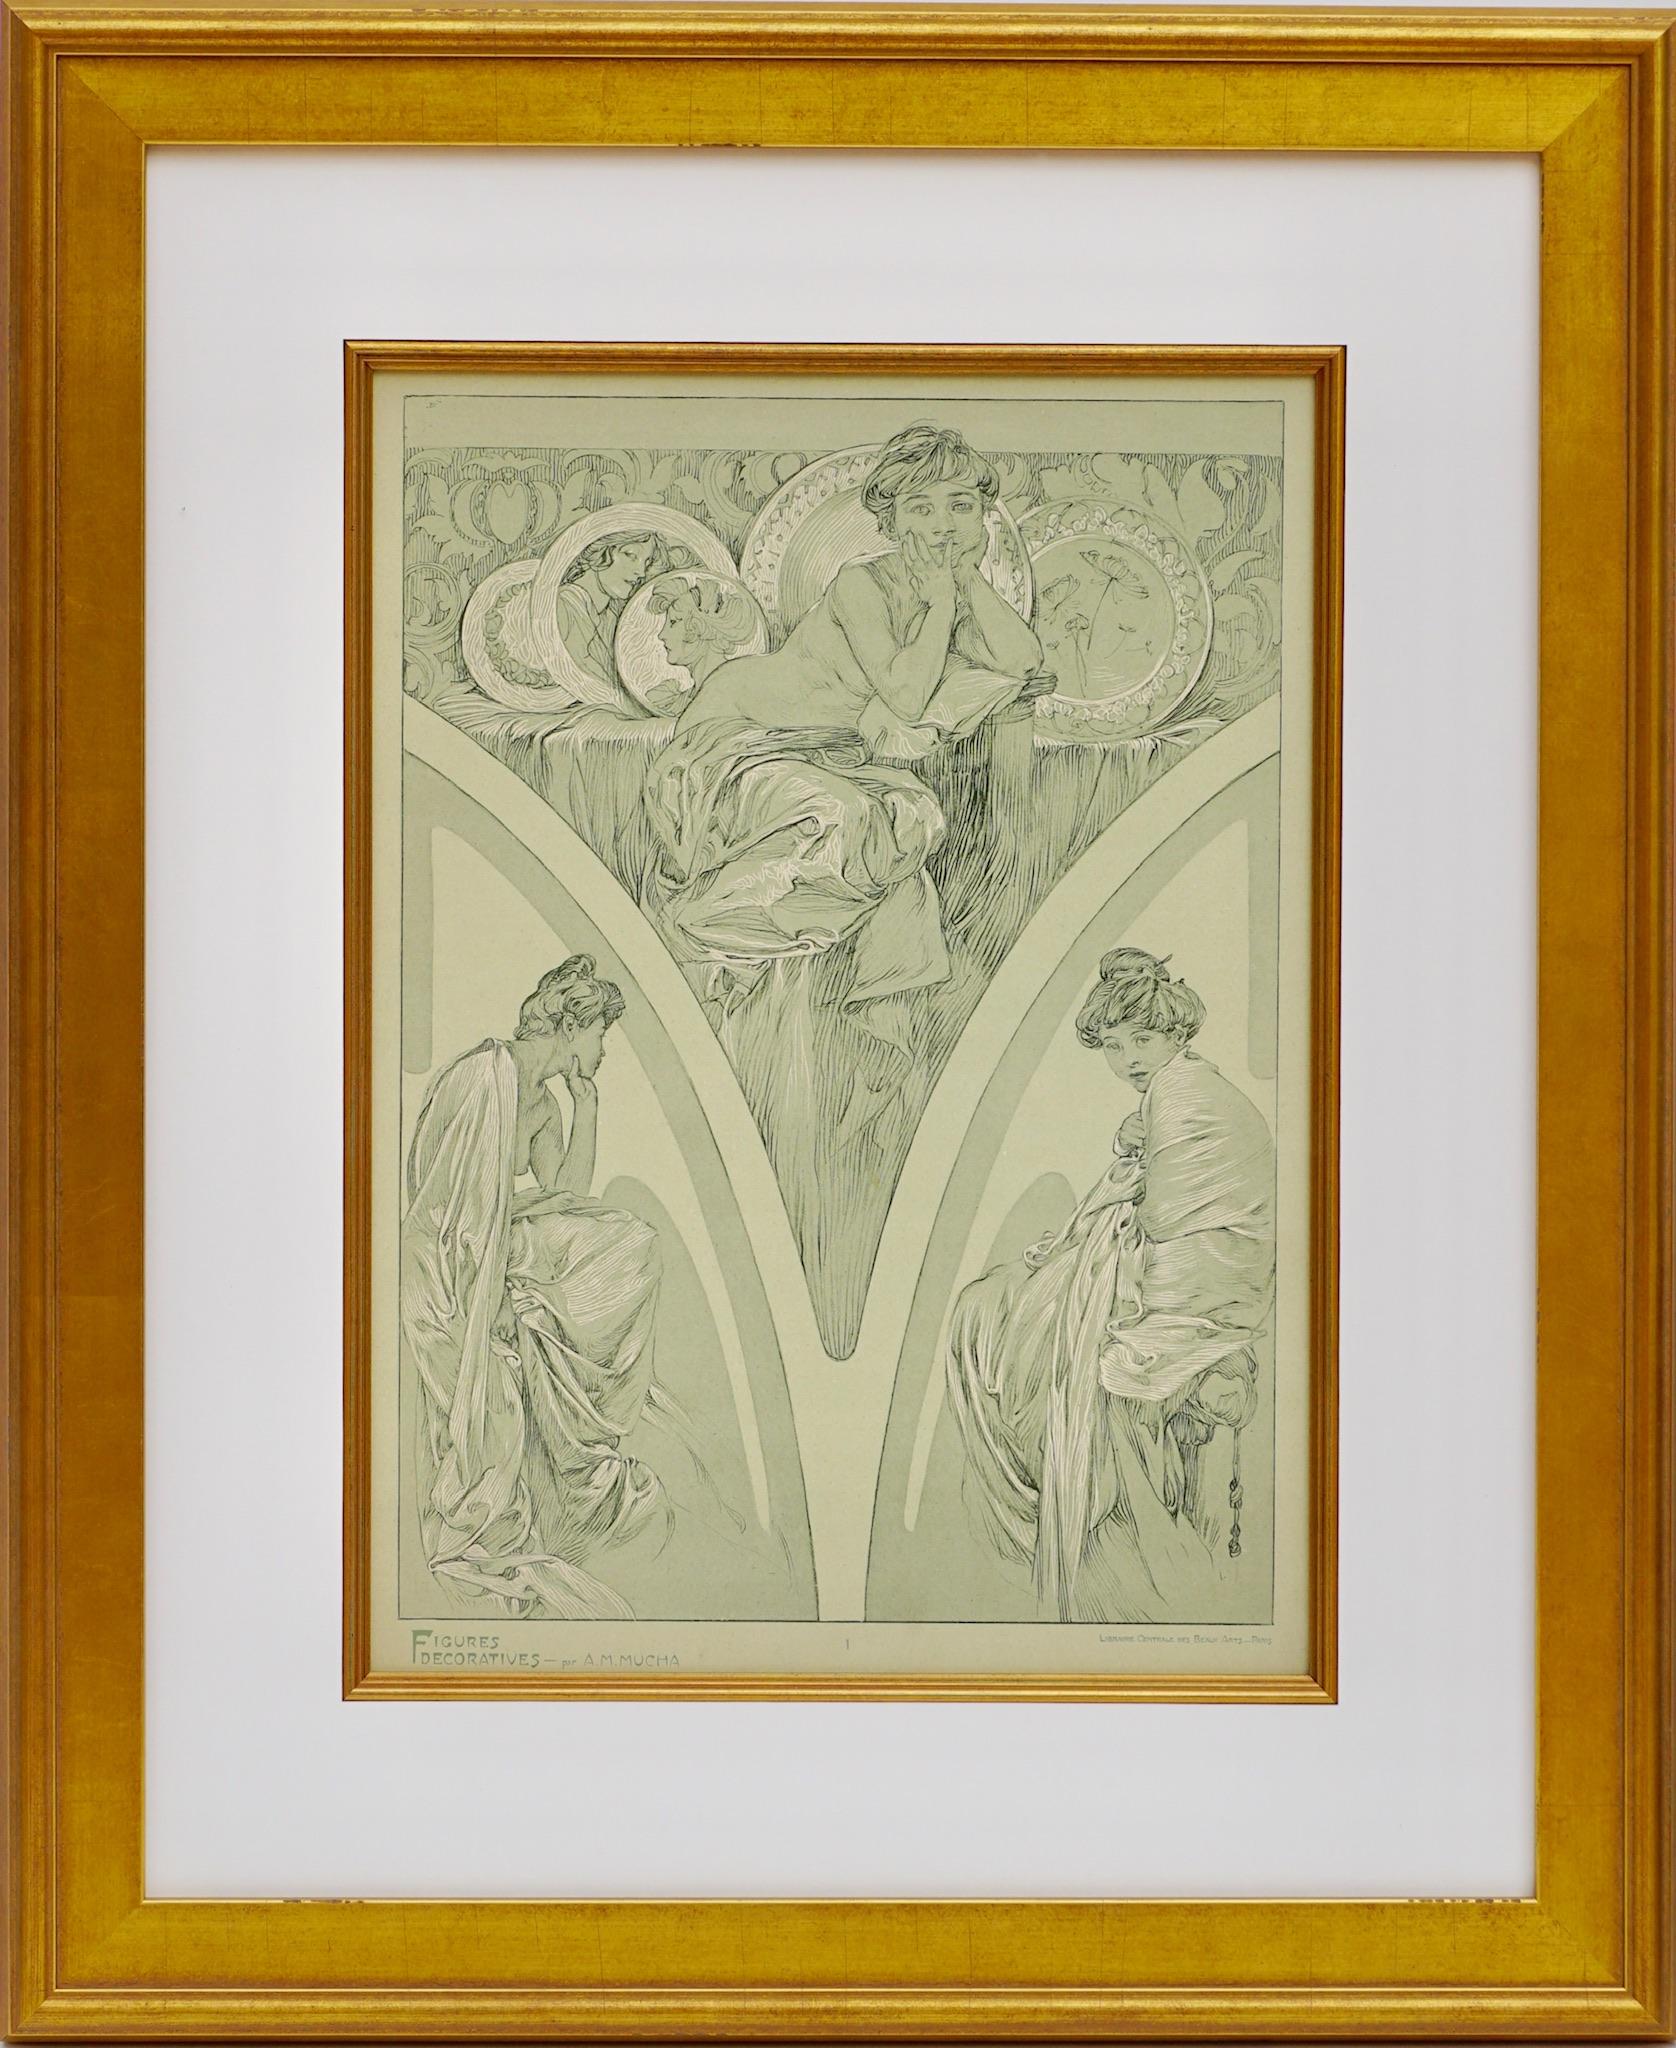 A framed Art Nouveau poster by Alphone Mucha from 1905 representing Muchas sketched designs of nudes, woman and beautiful ladies in greens and whites on velem paper. Plate 1. 

Figures Decoratives par A. M. Mucha, PARIS Librairie Centrale des